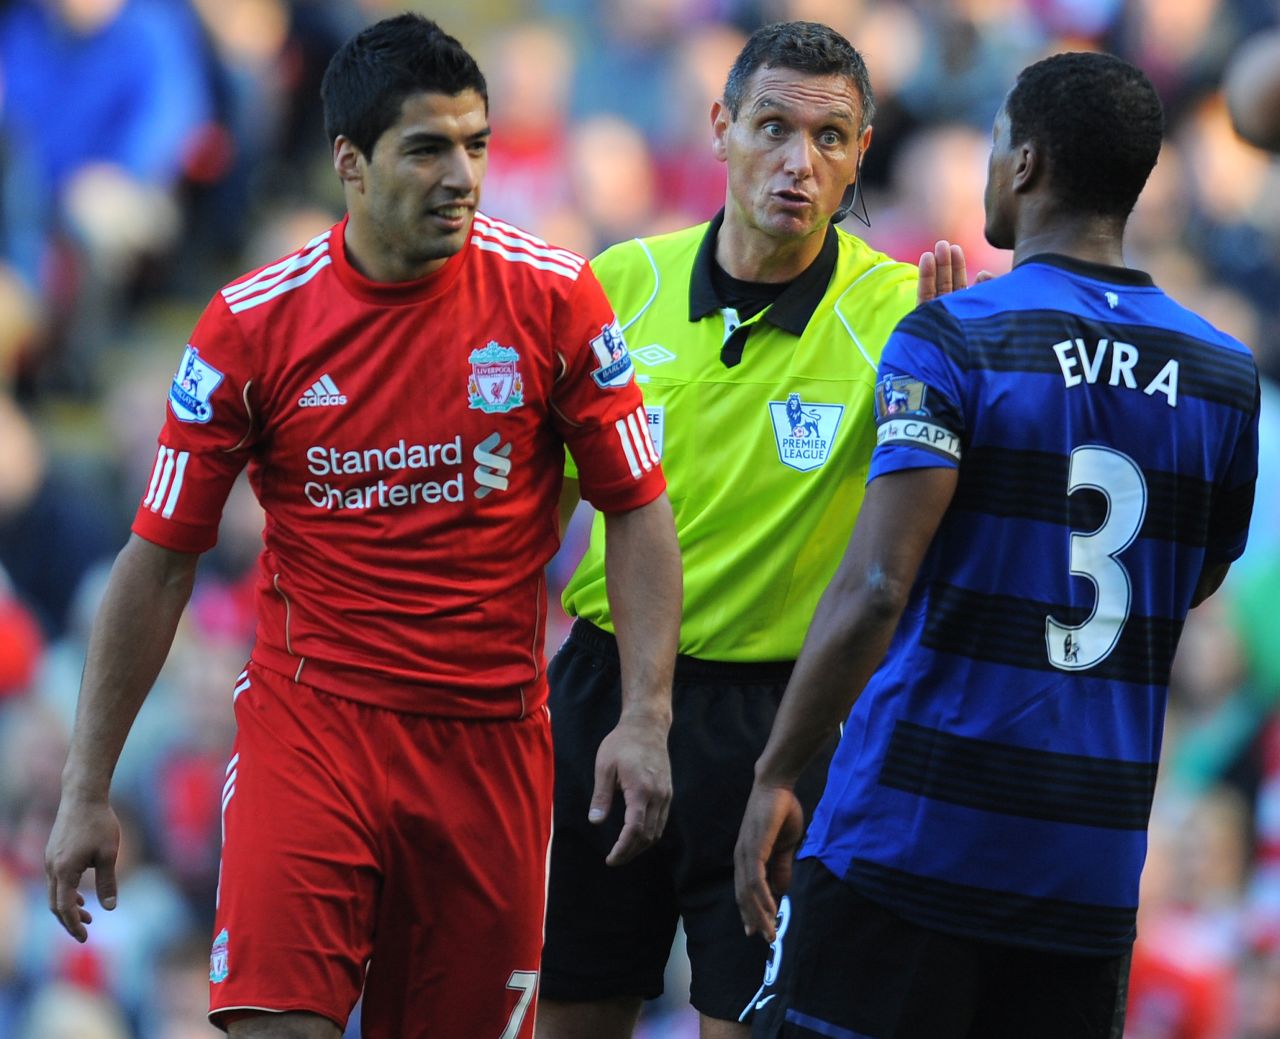 One of the most high-profile incidents in England saw Liverpool striker Luis Suarez banned for eight-matches for racially abusing Manchester United's Patrice Evra in October 2011. Prior to the teams' return fixture the following February, Suarez refused to shake Evra's hand. Suarez subsequently apologized.